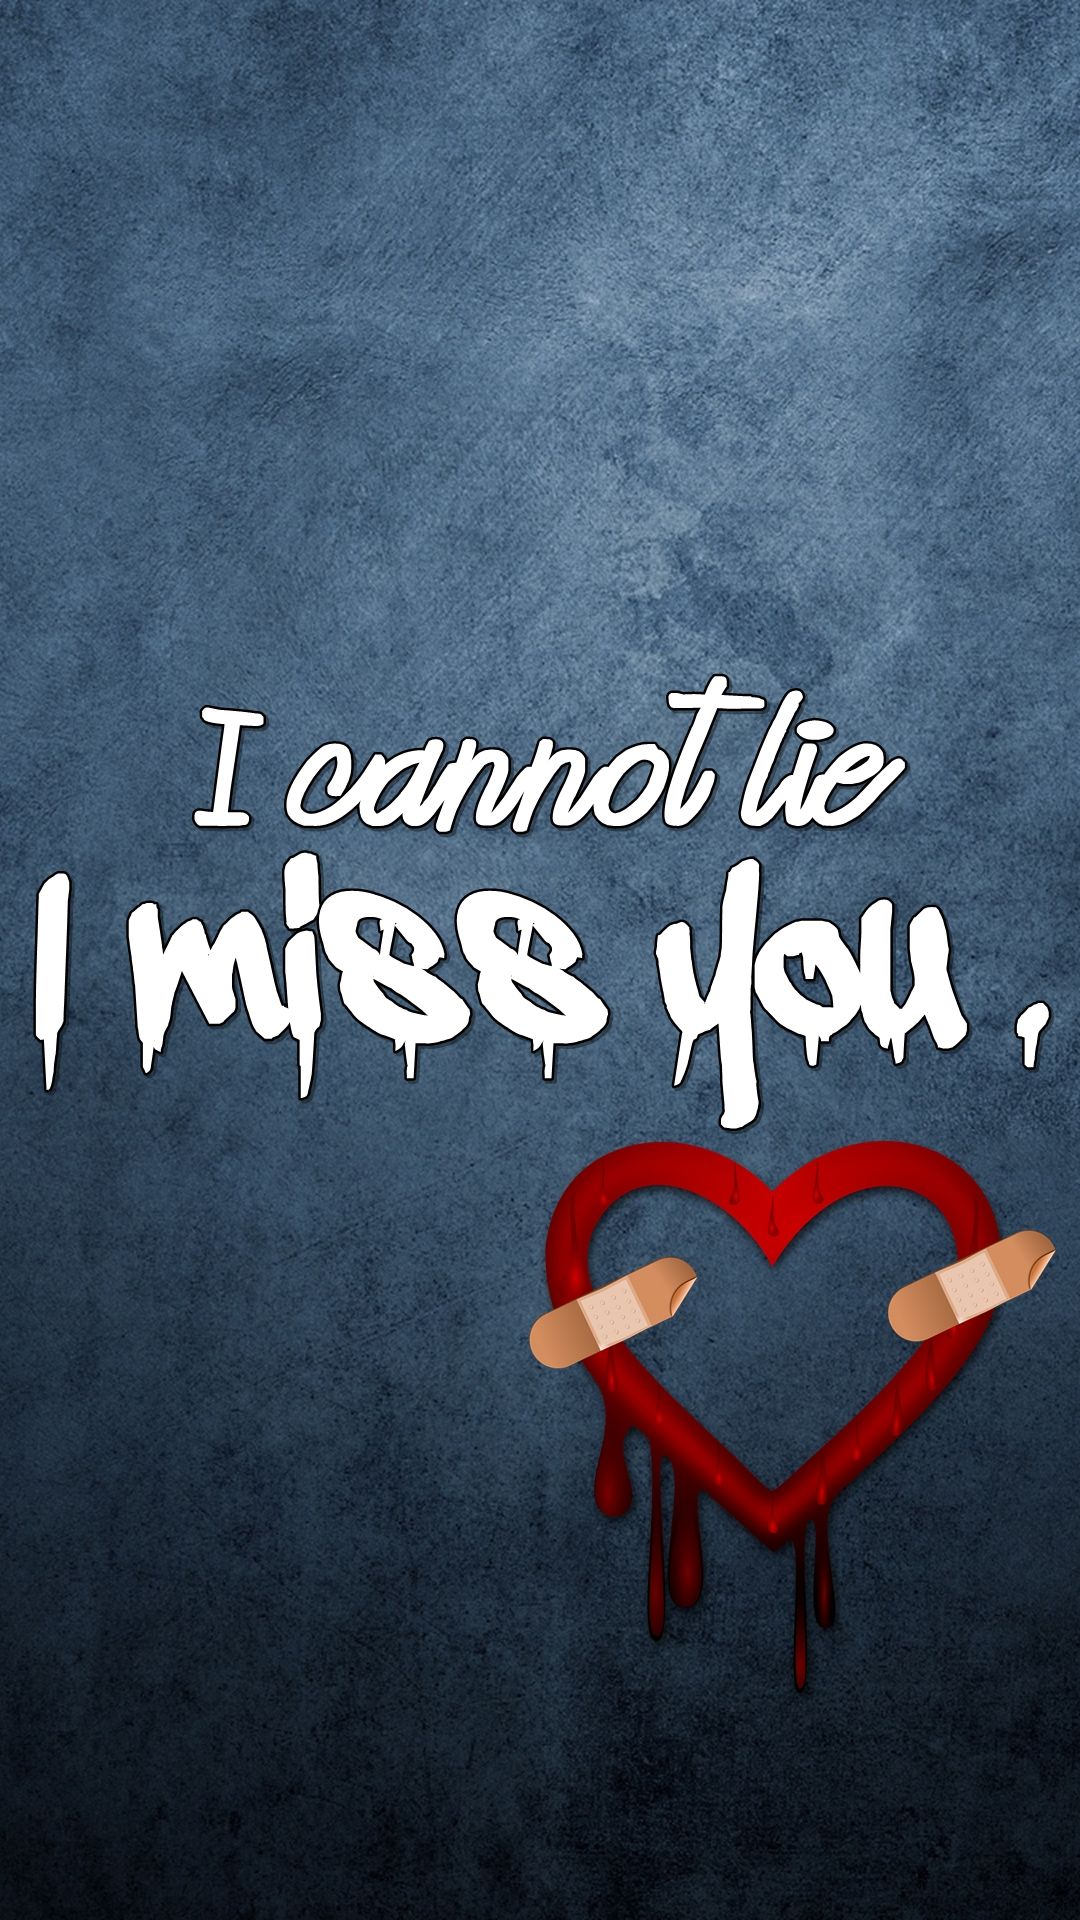 I cannot lie, I miss you. Galaxy S5 Wallpaper 1080x1920